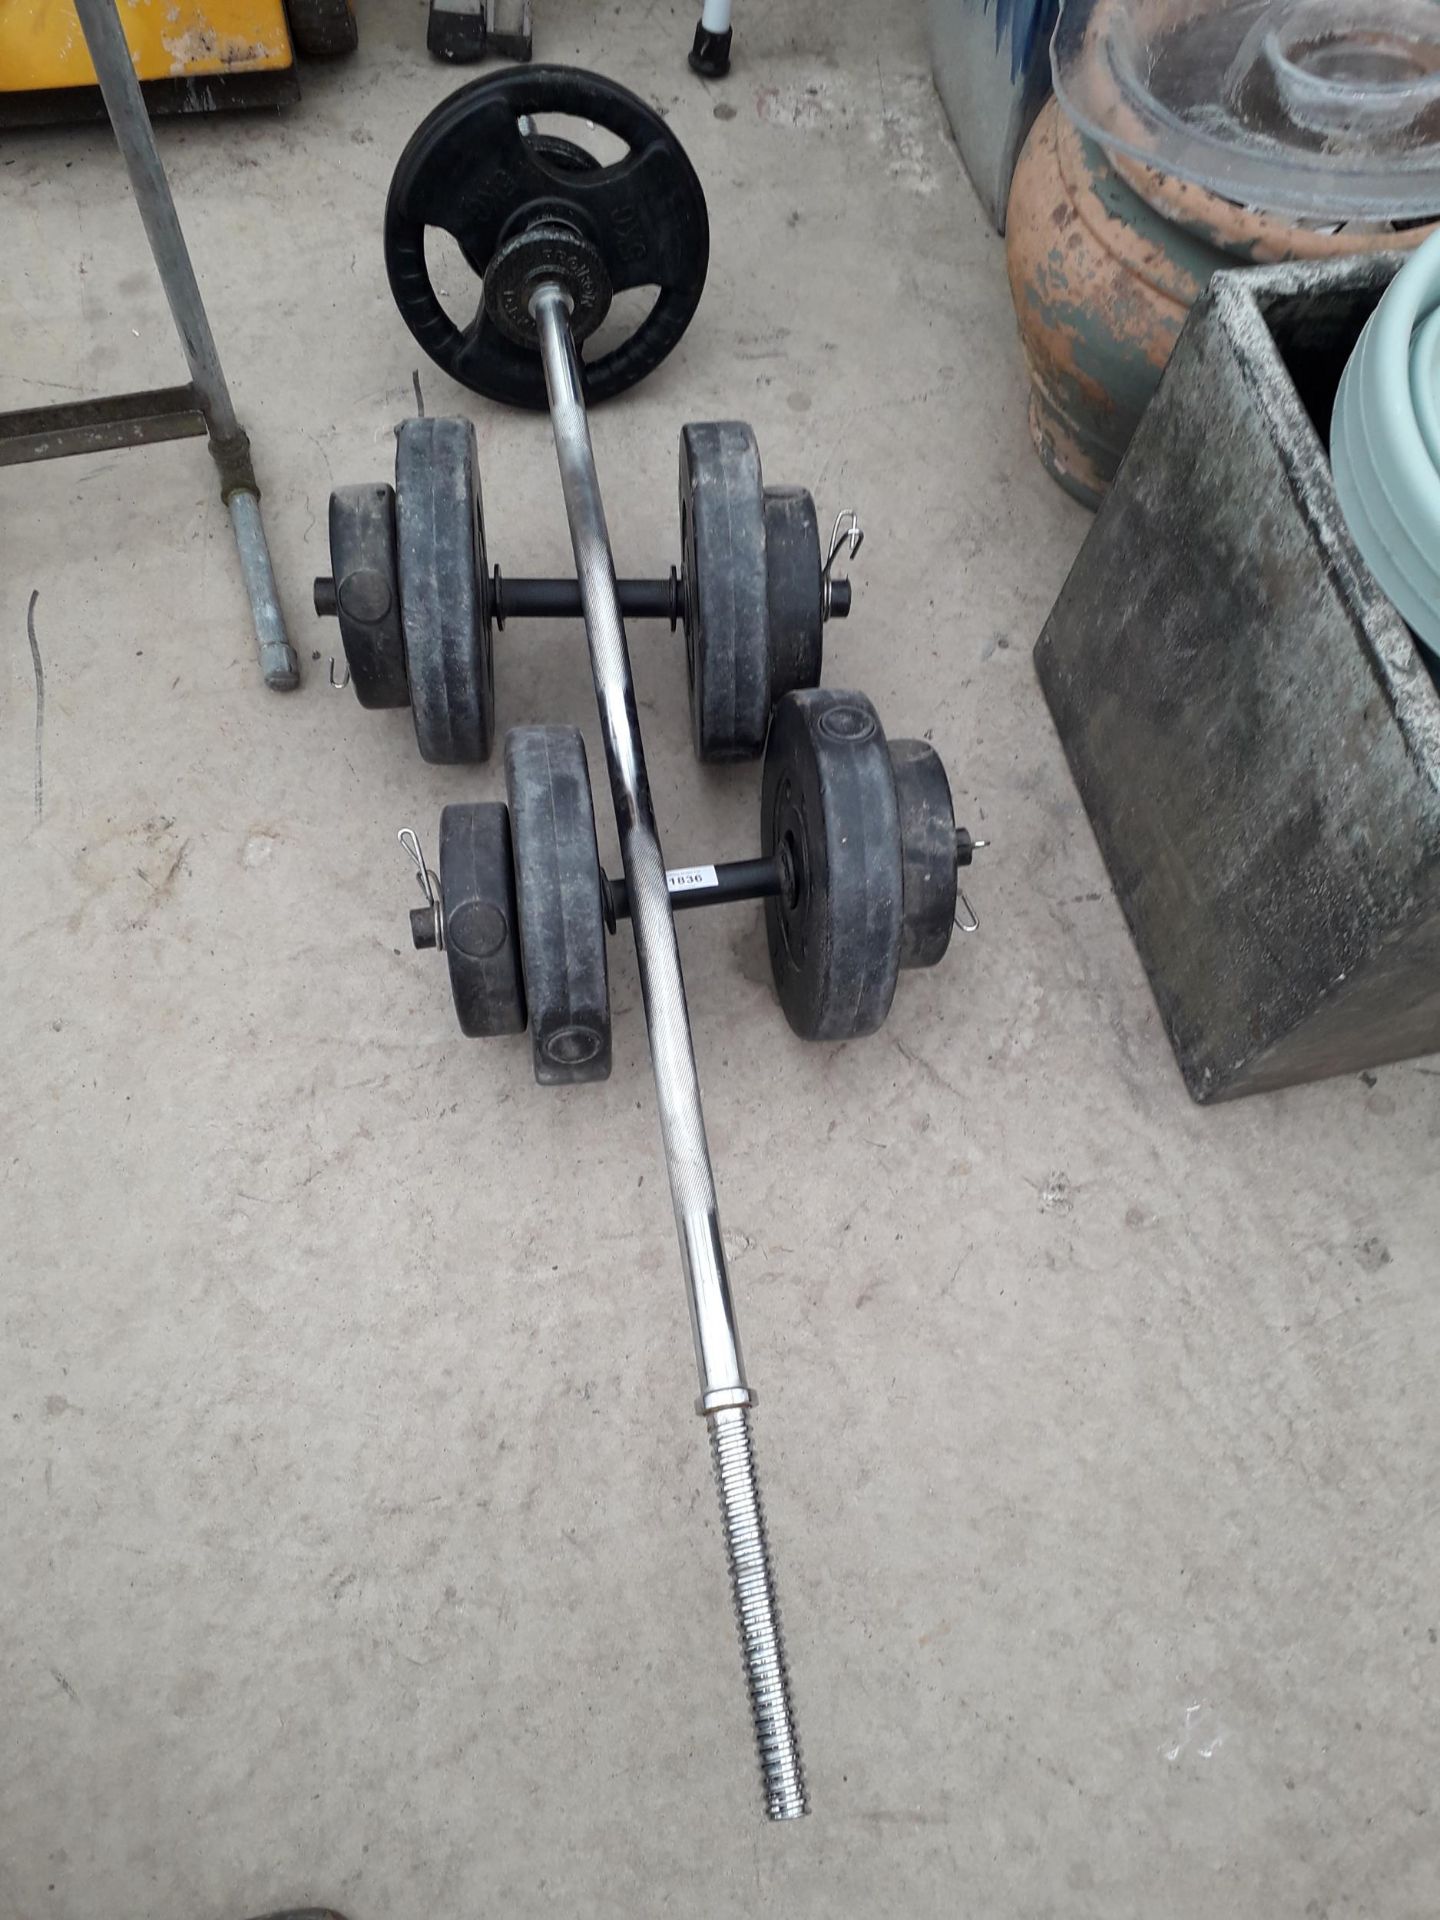 A PAIR OF DUMB BELL WEIGHTS AND A CHROME WEIGHTLIFTING BAR